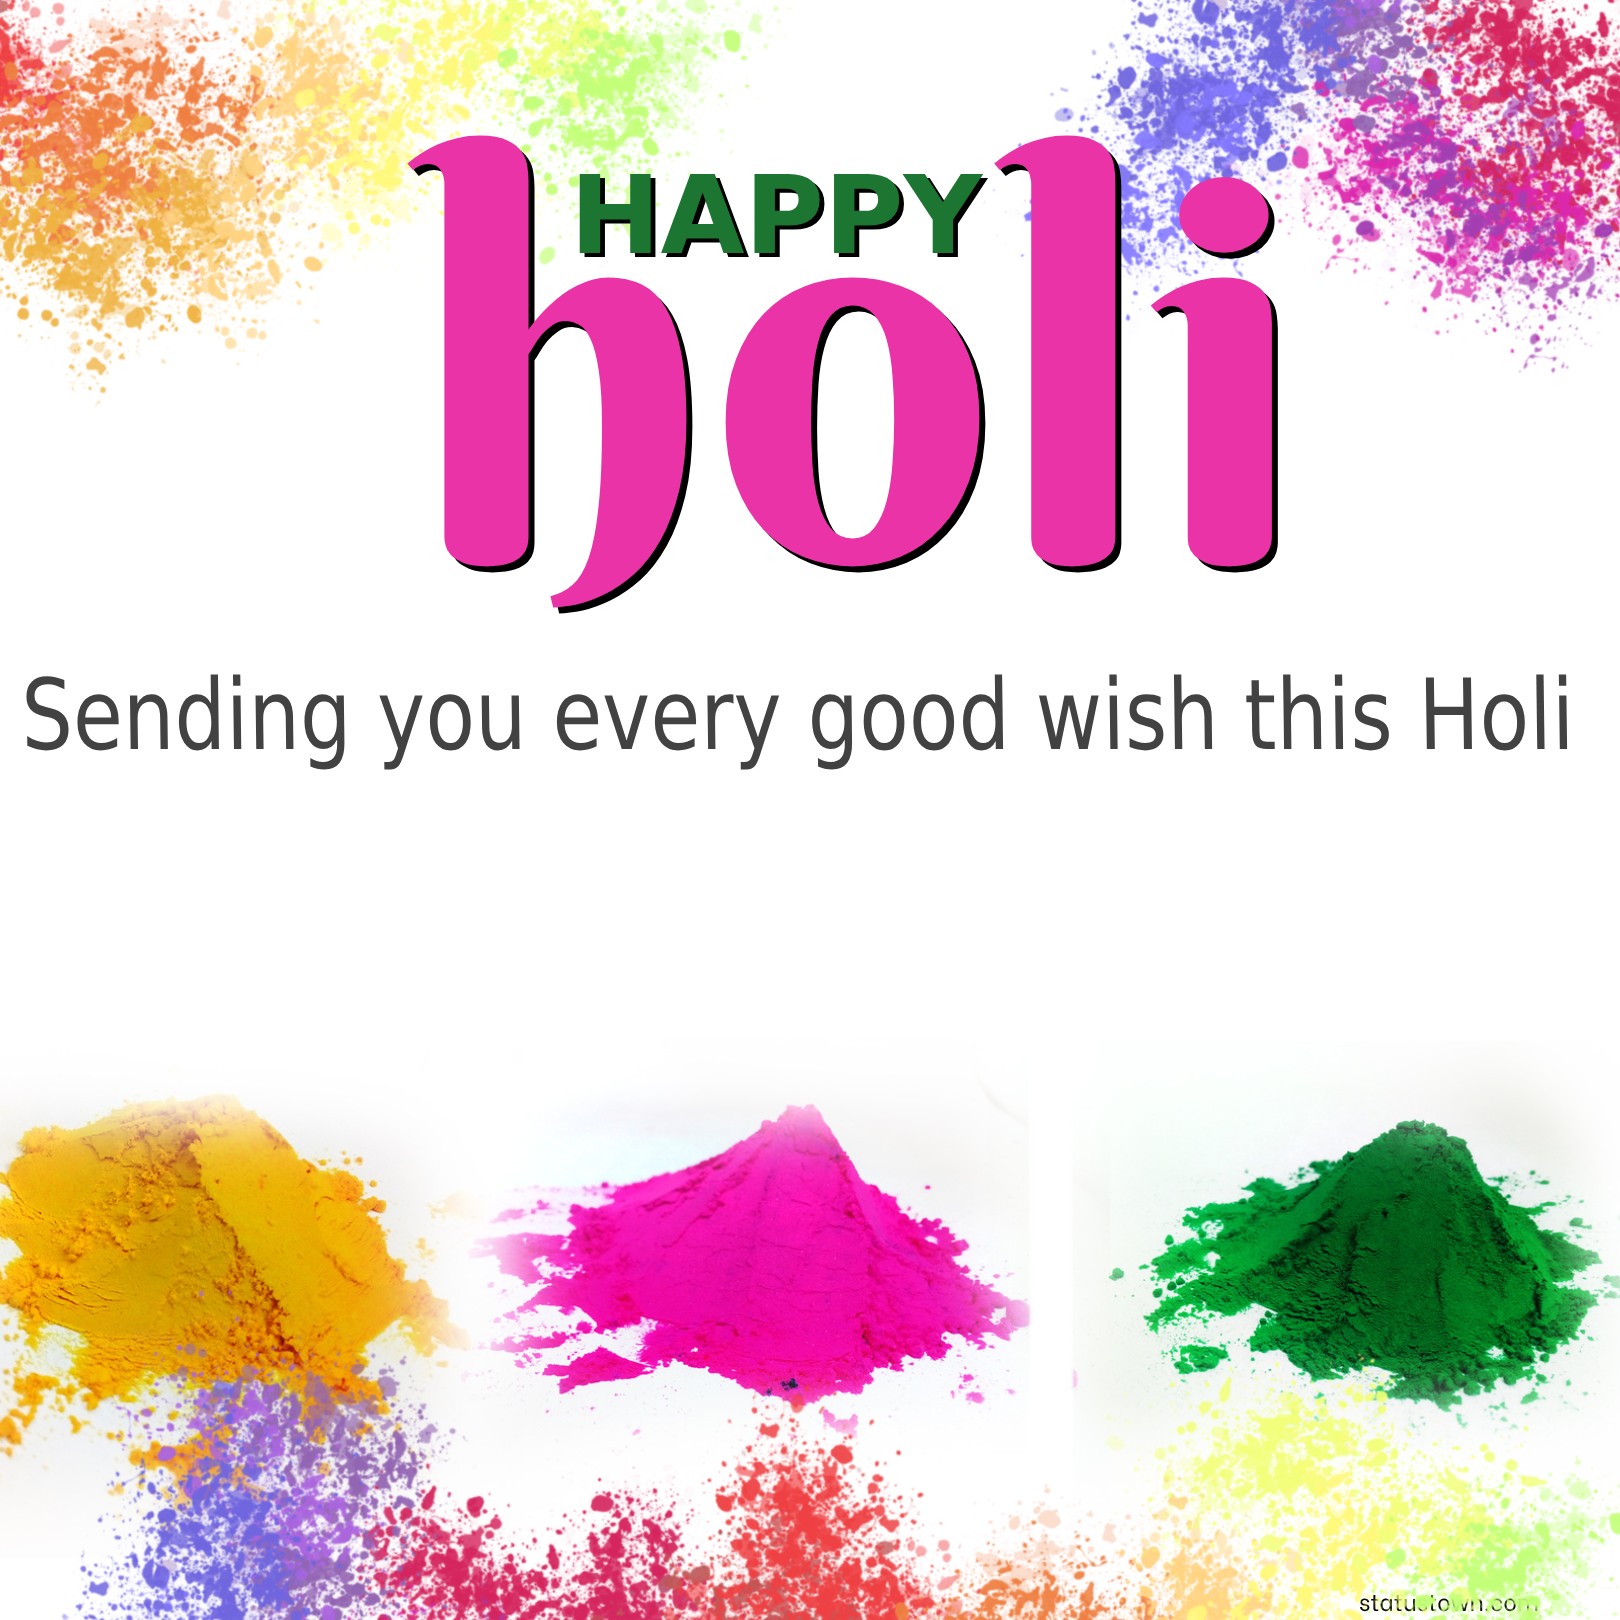 Sending you every good wish this Holi. - Holi Wishes wishes, messages, and status